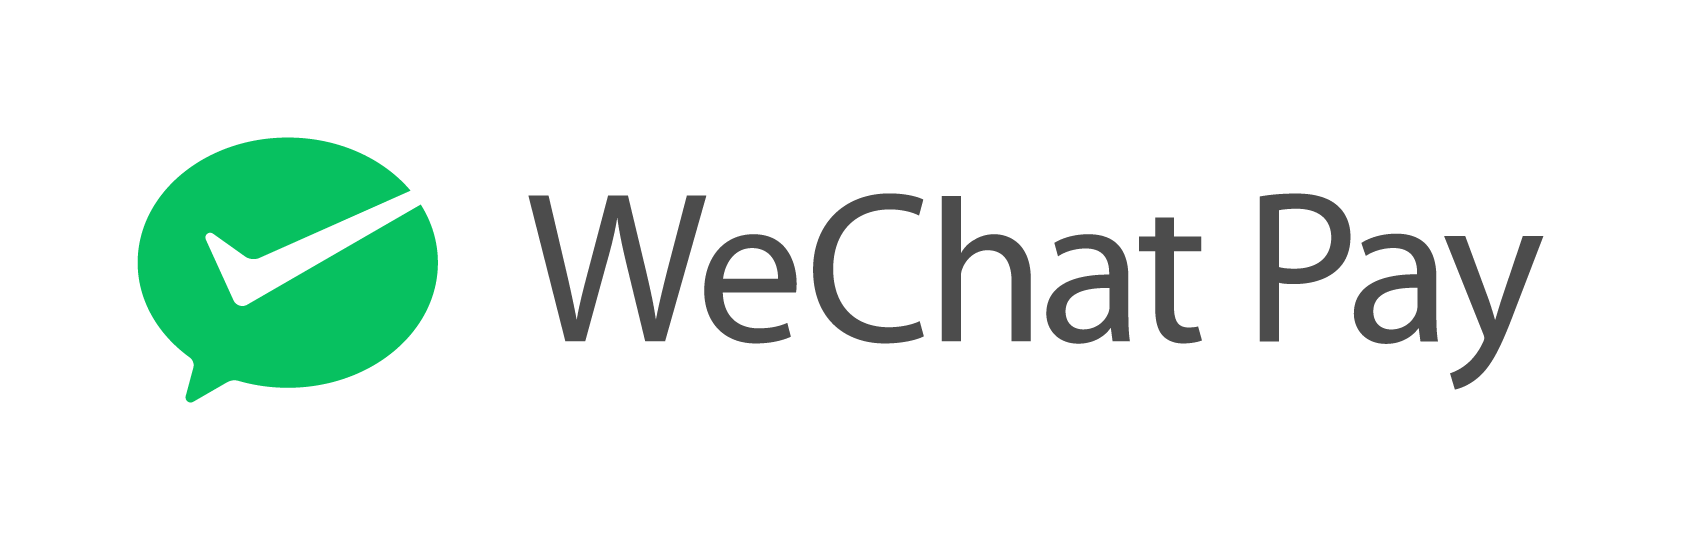 wechat pay icon